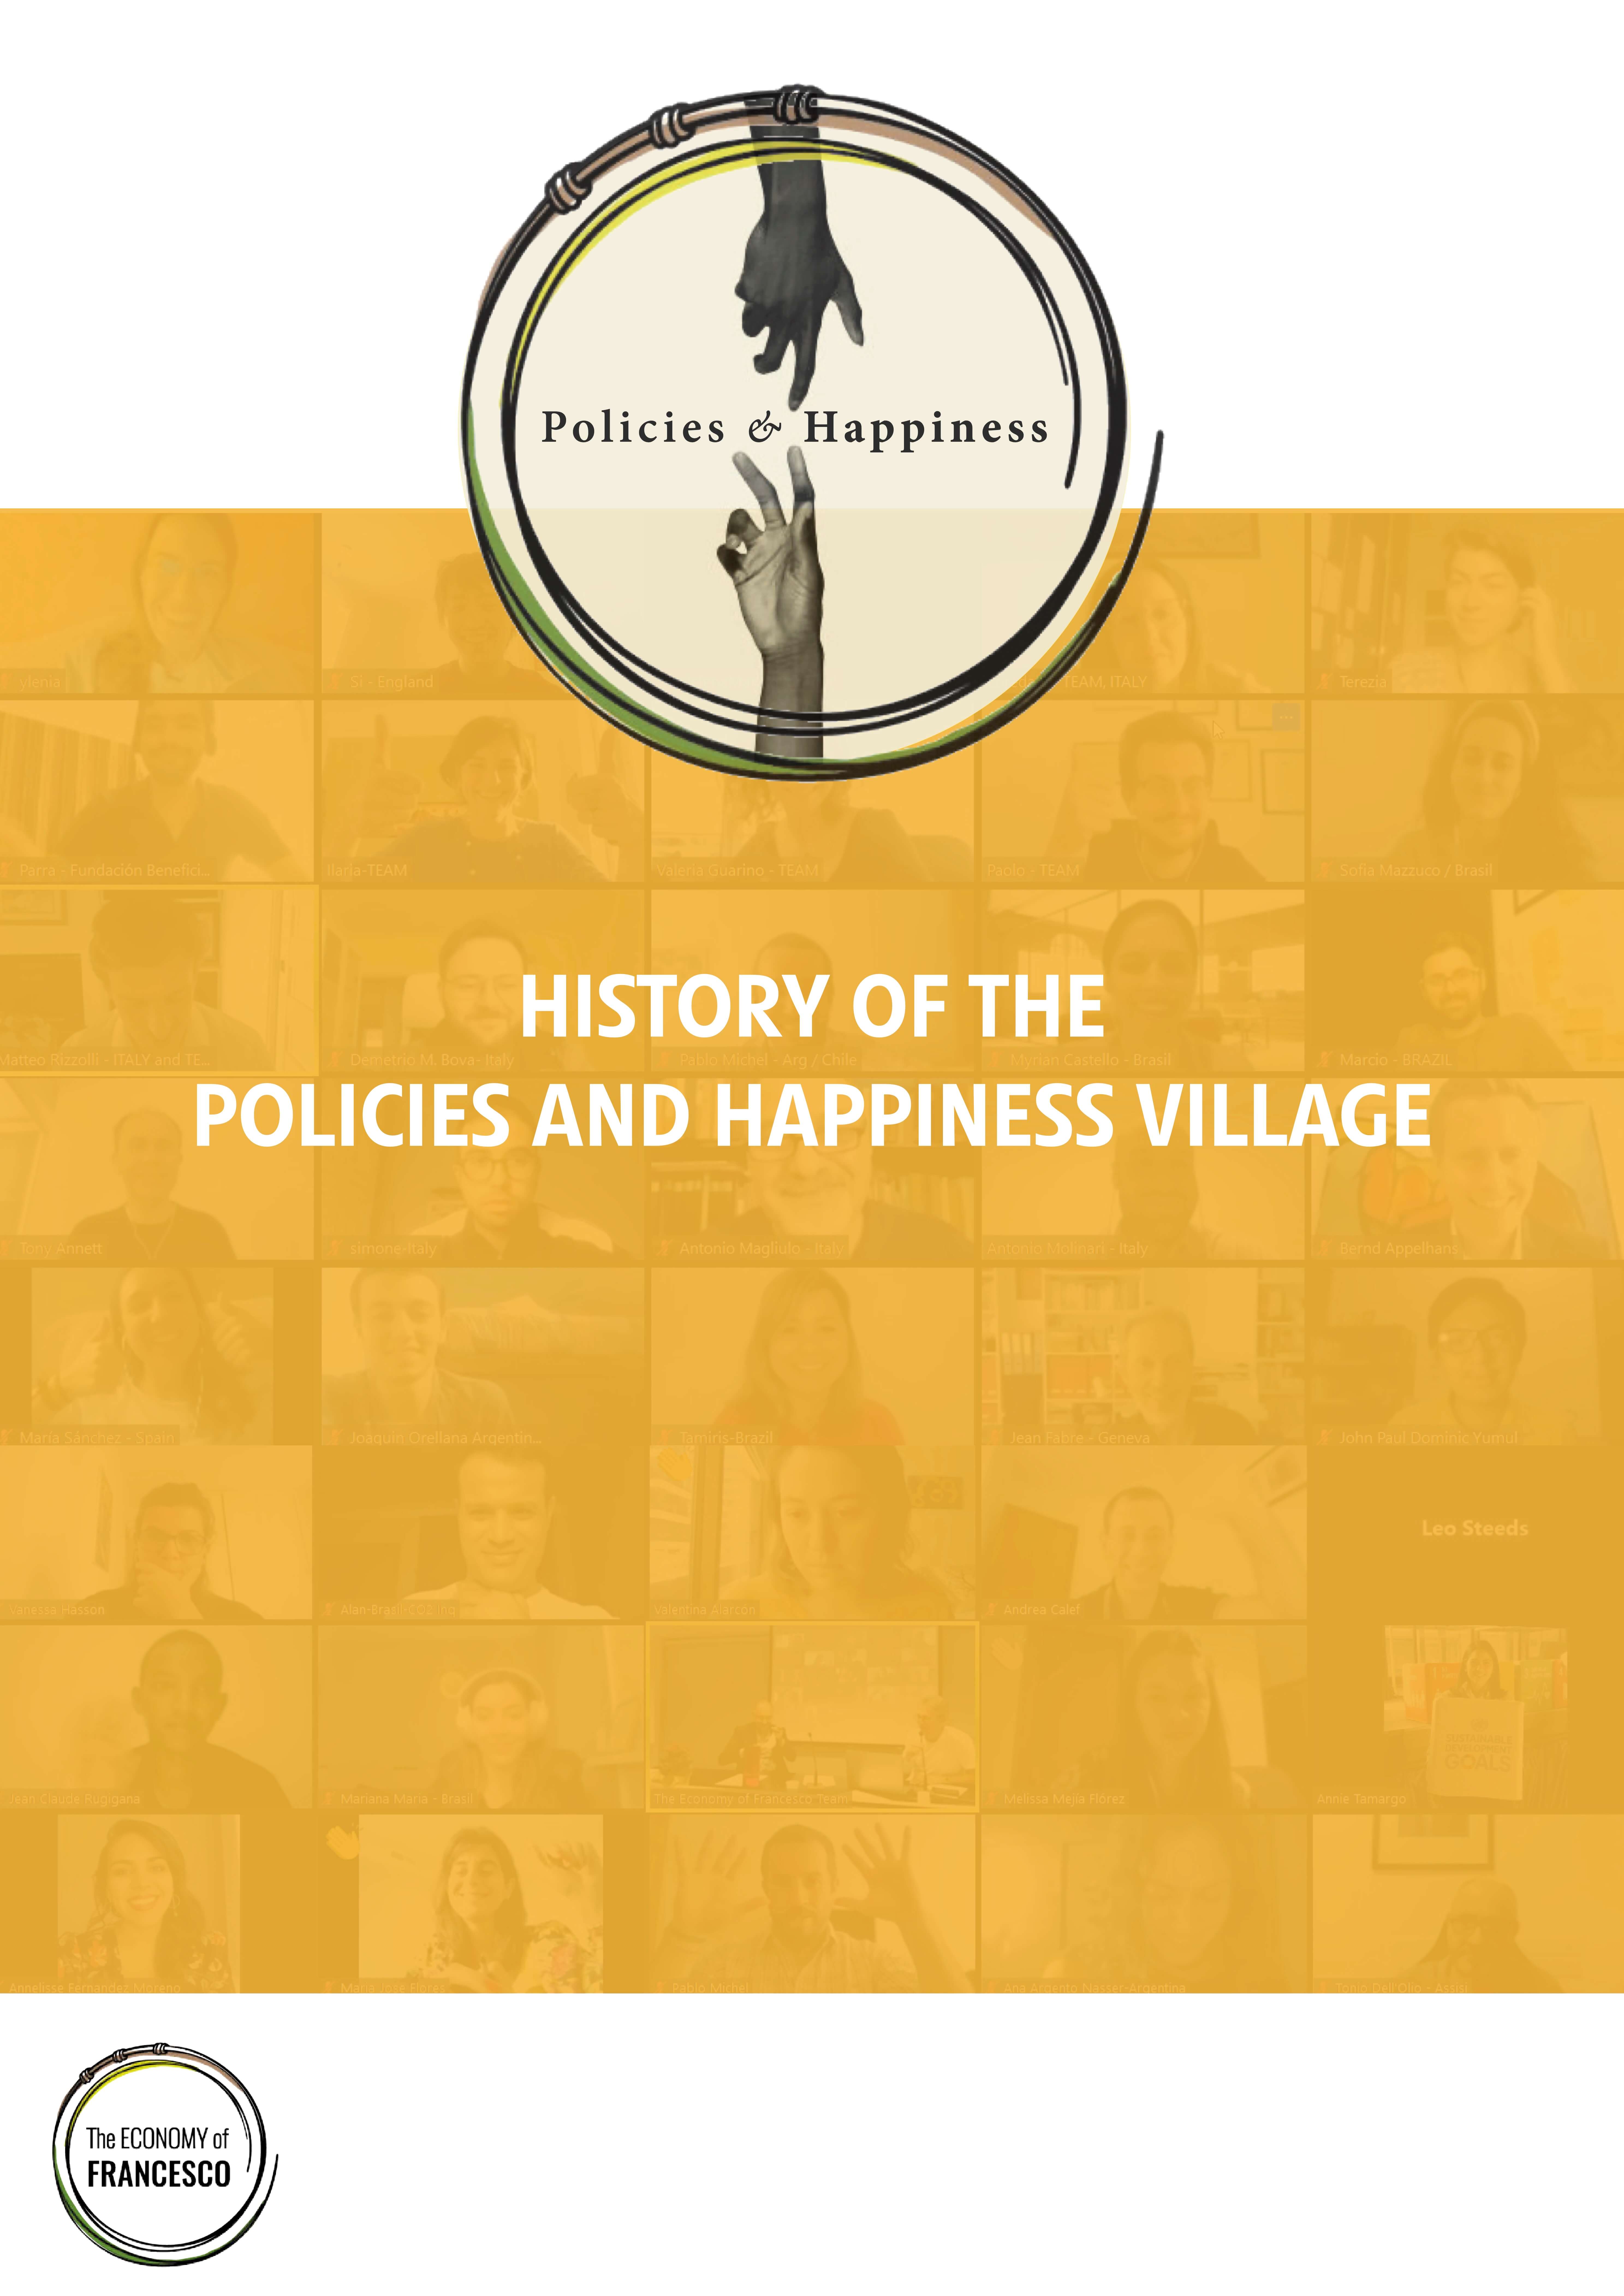 History of the Policies for Happiness Village